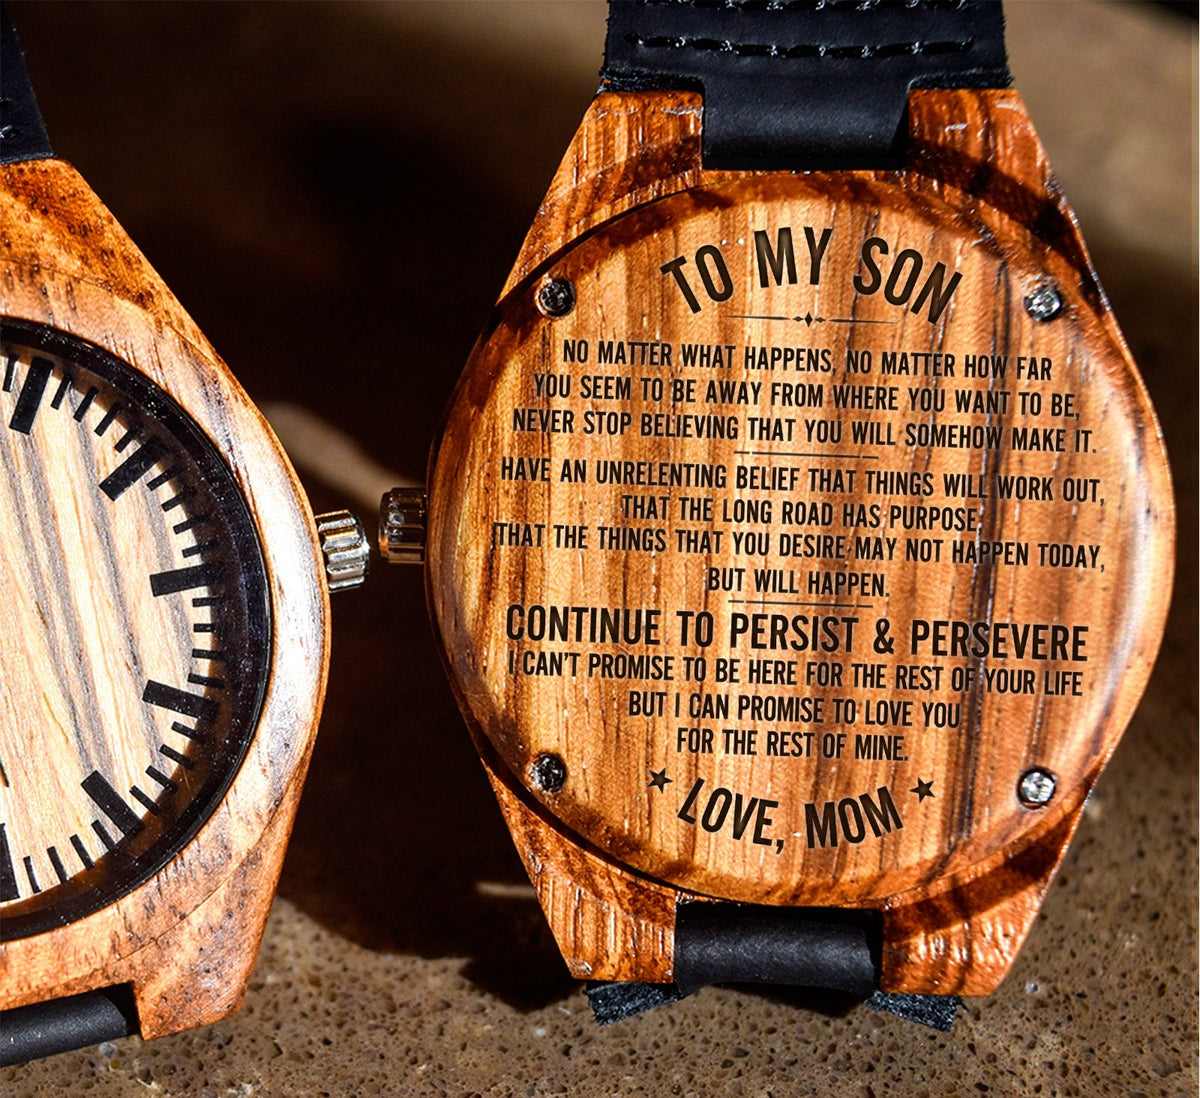 To My Son - Continue to Persist &amp; Persevere - Wooden Watch